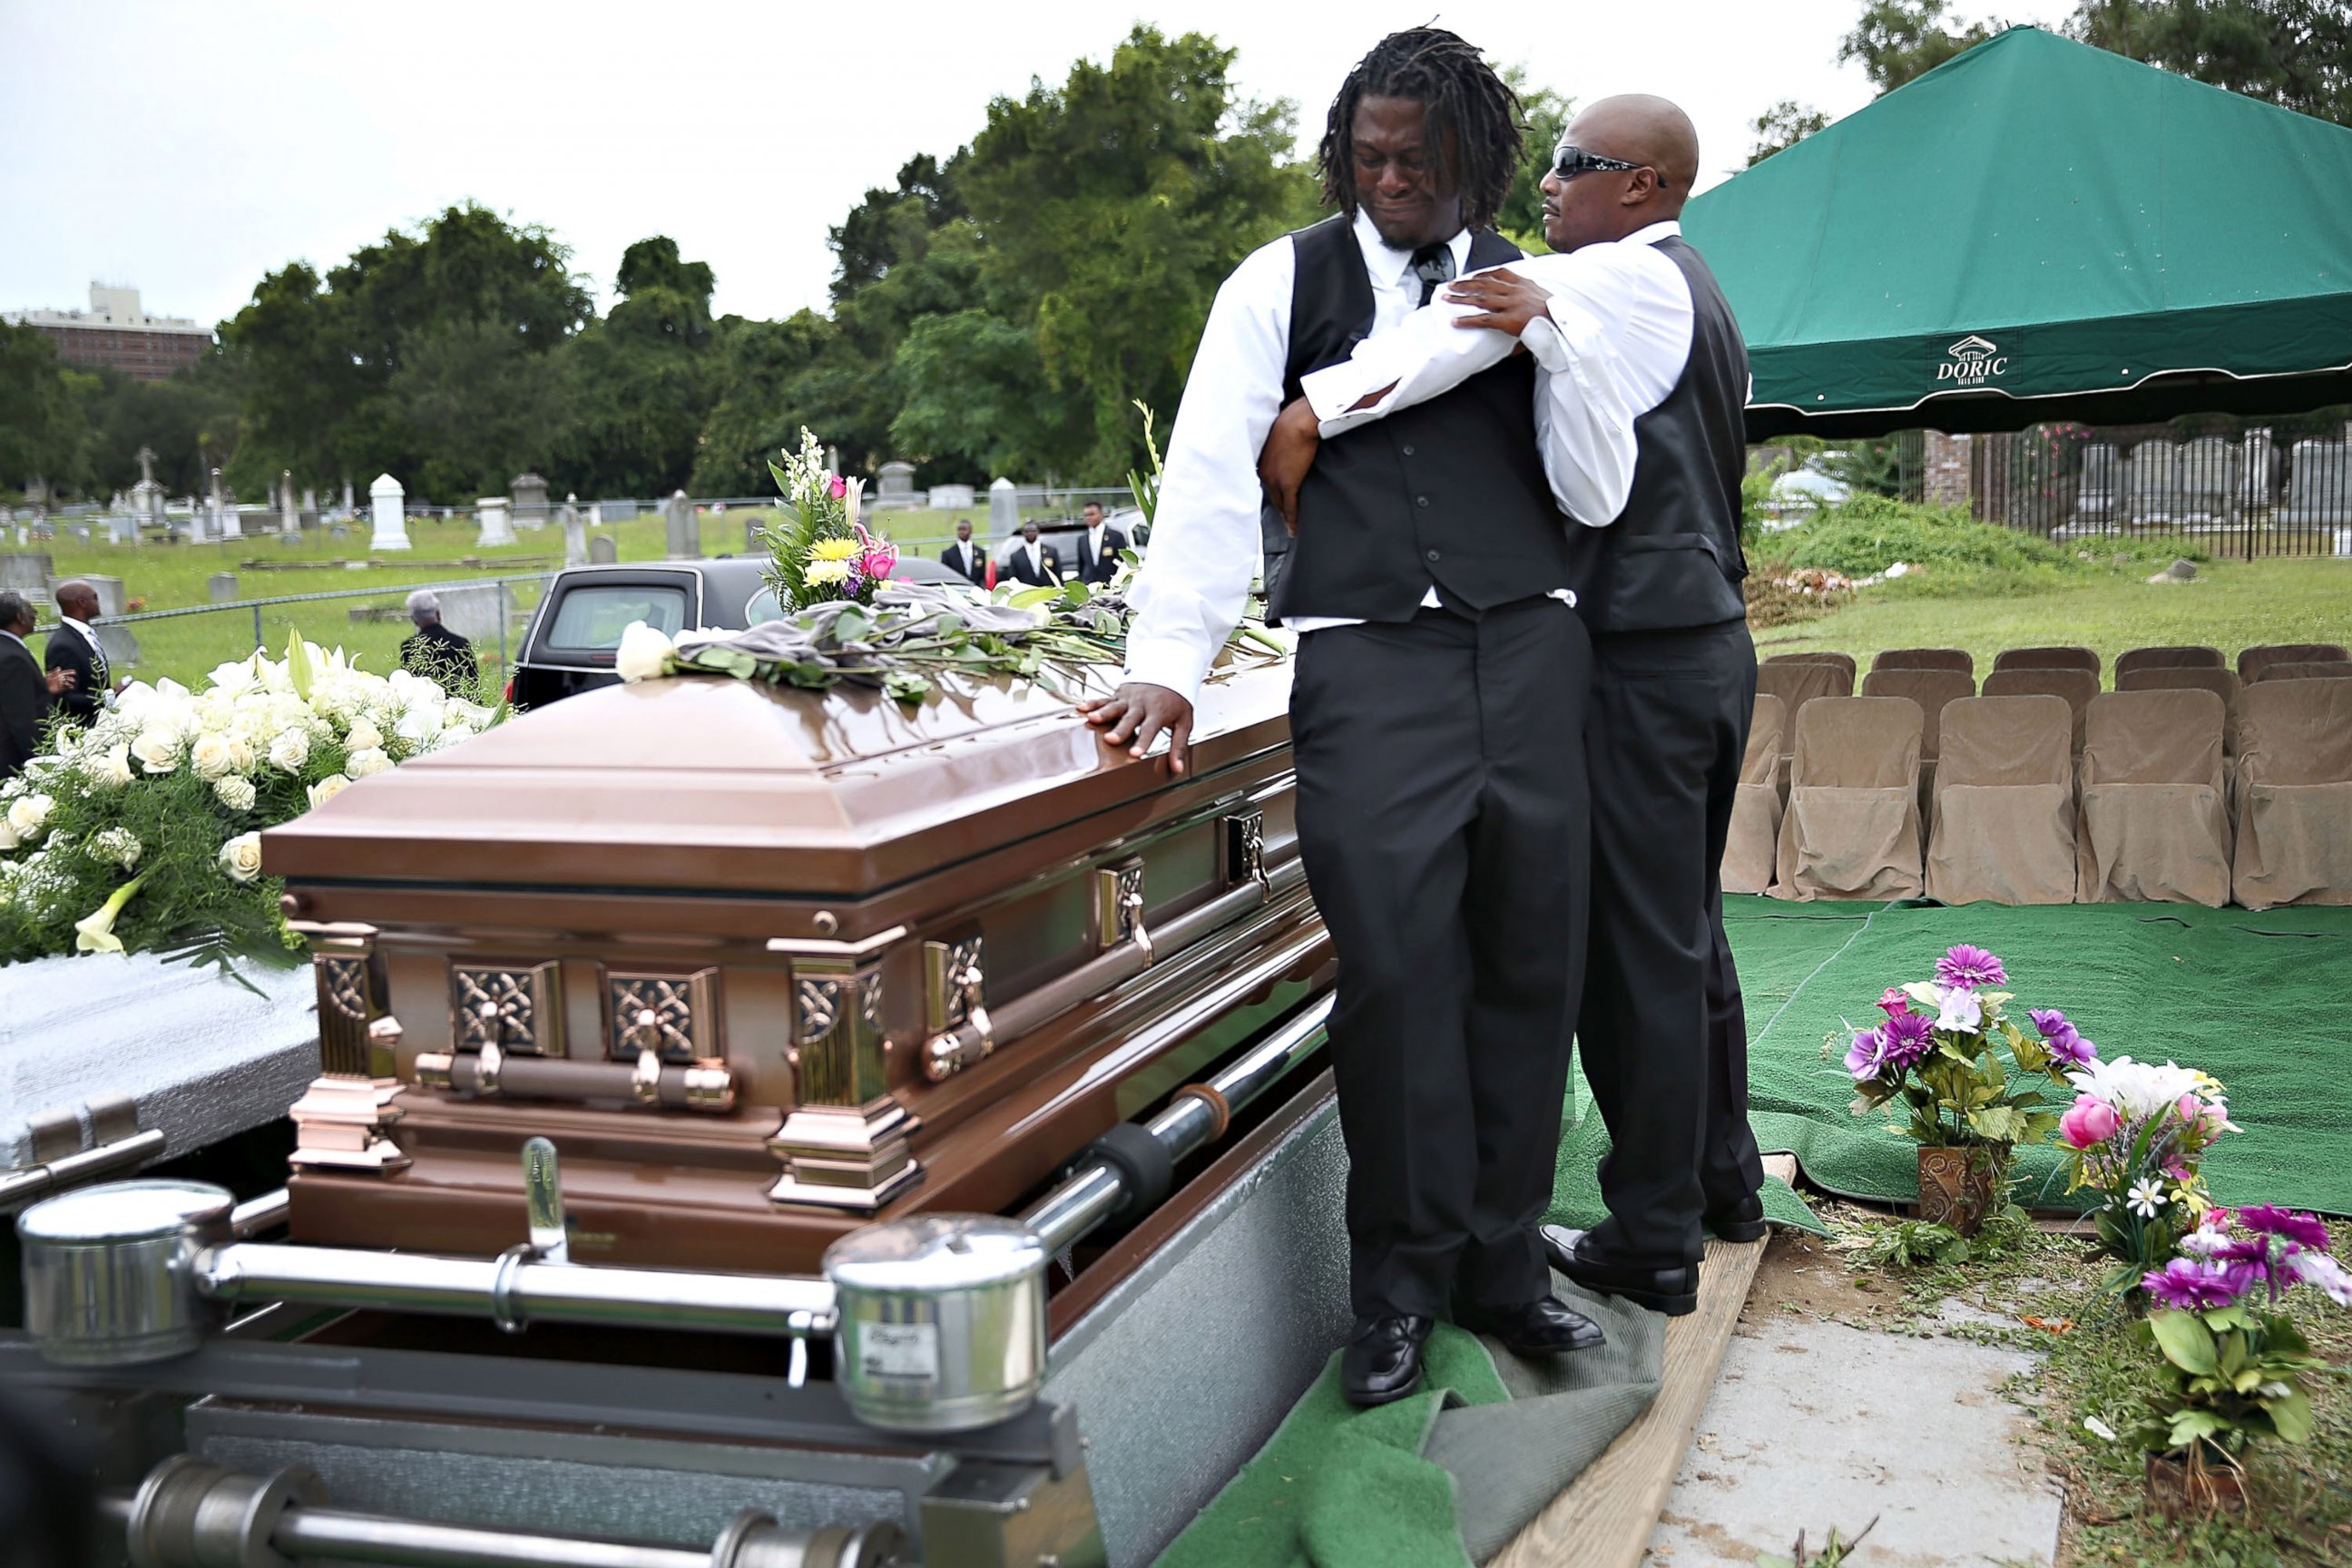 PHOTO: Brandon Risher, left, is comforted beside the casket of his grandmother, Ethel Lance, 70, one of nine victims of a mass shooting at the Emanuel AME Church, June 25, 2015 in North Charleston, South Carolina. 